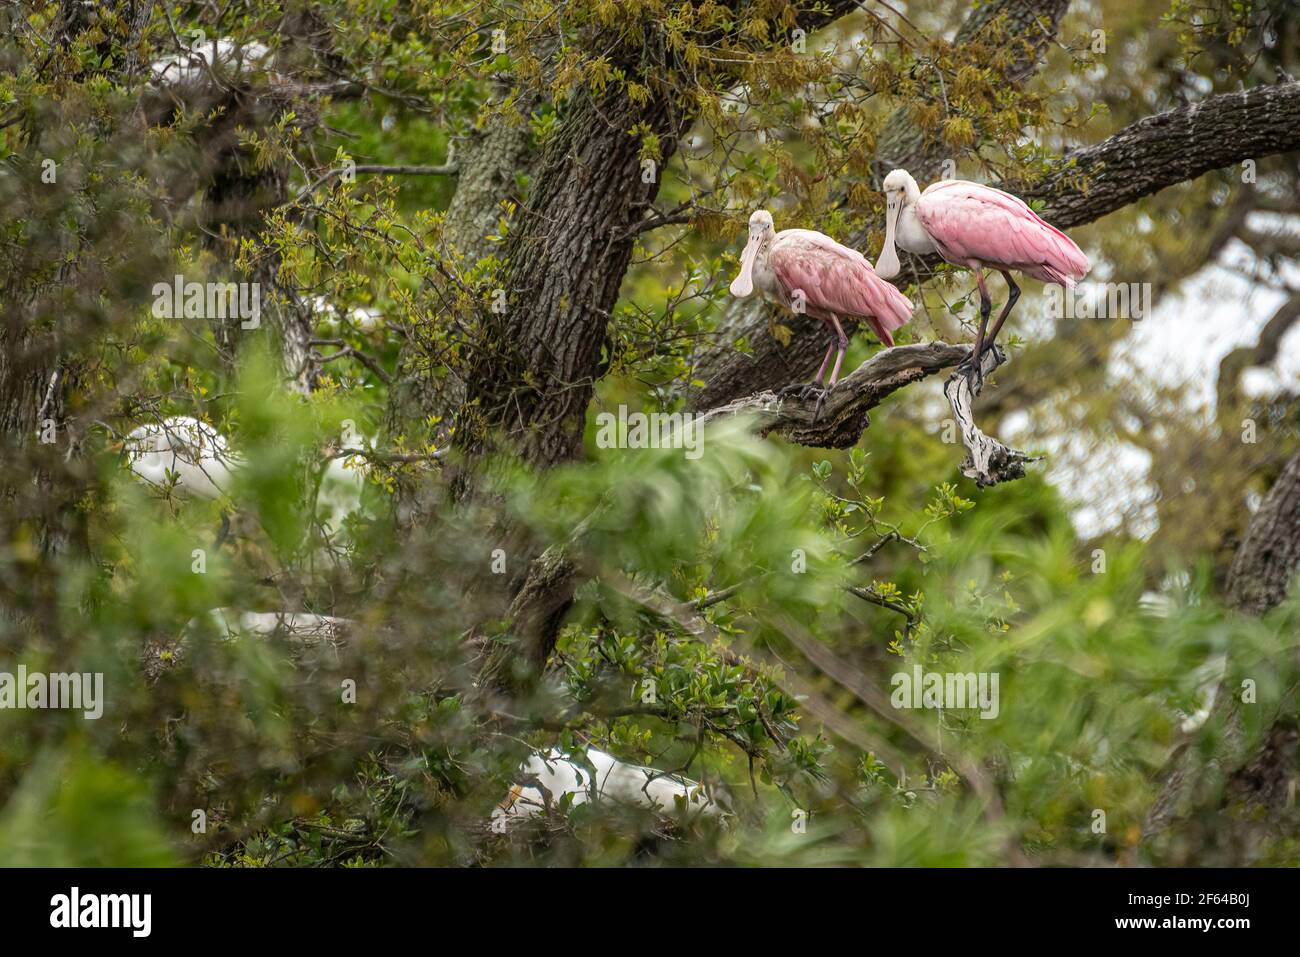 Roseate spoonbills (Platalea ajaja) and nesting great egrets (Ardea alba) at a wading bird rookery in St. Augustine, Florida. (USA) Stock Photo